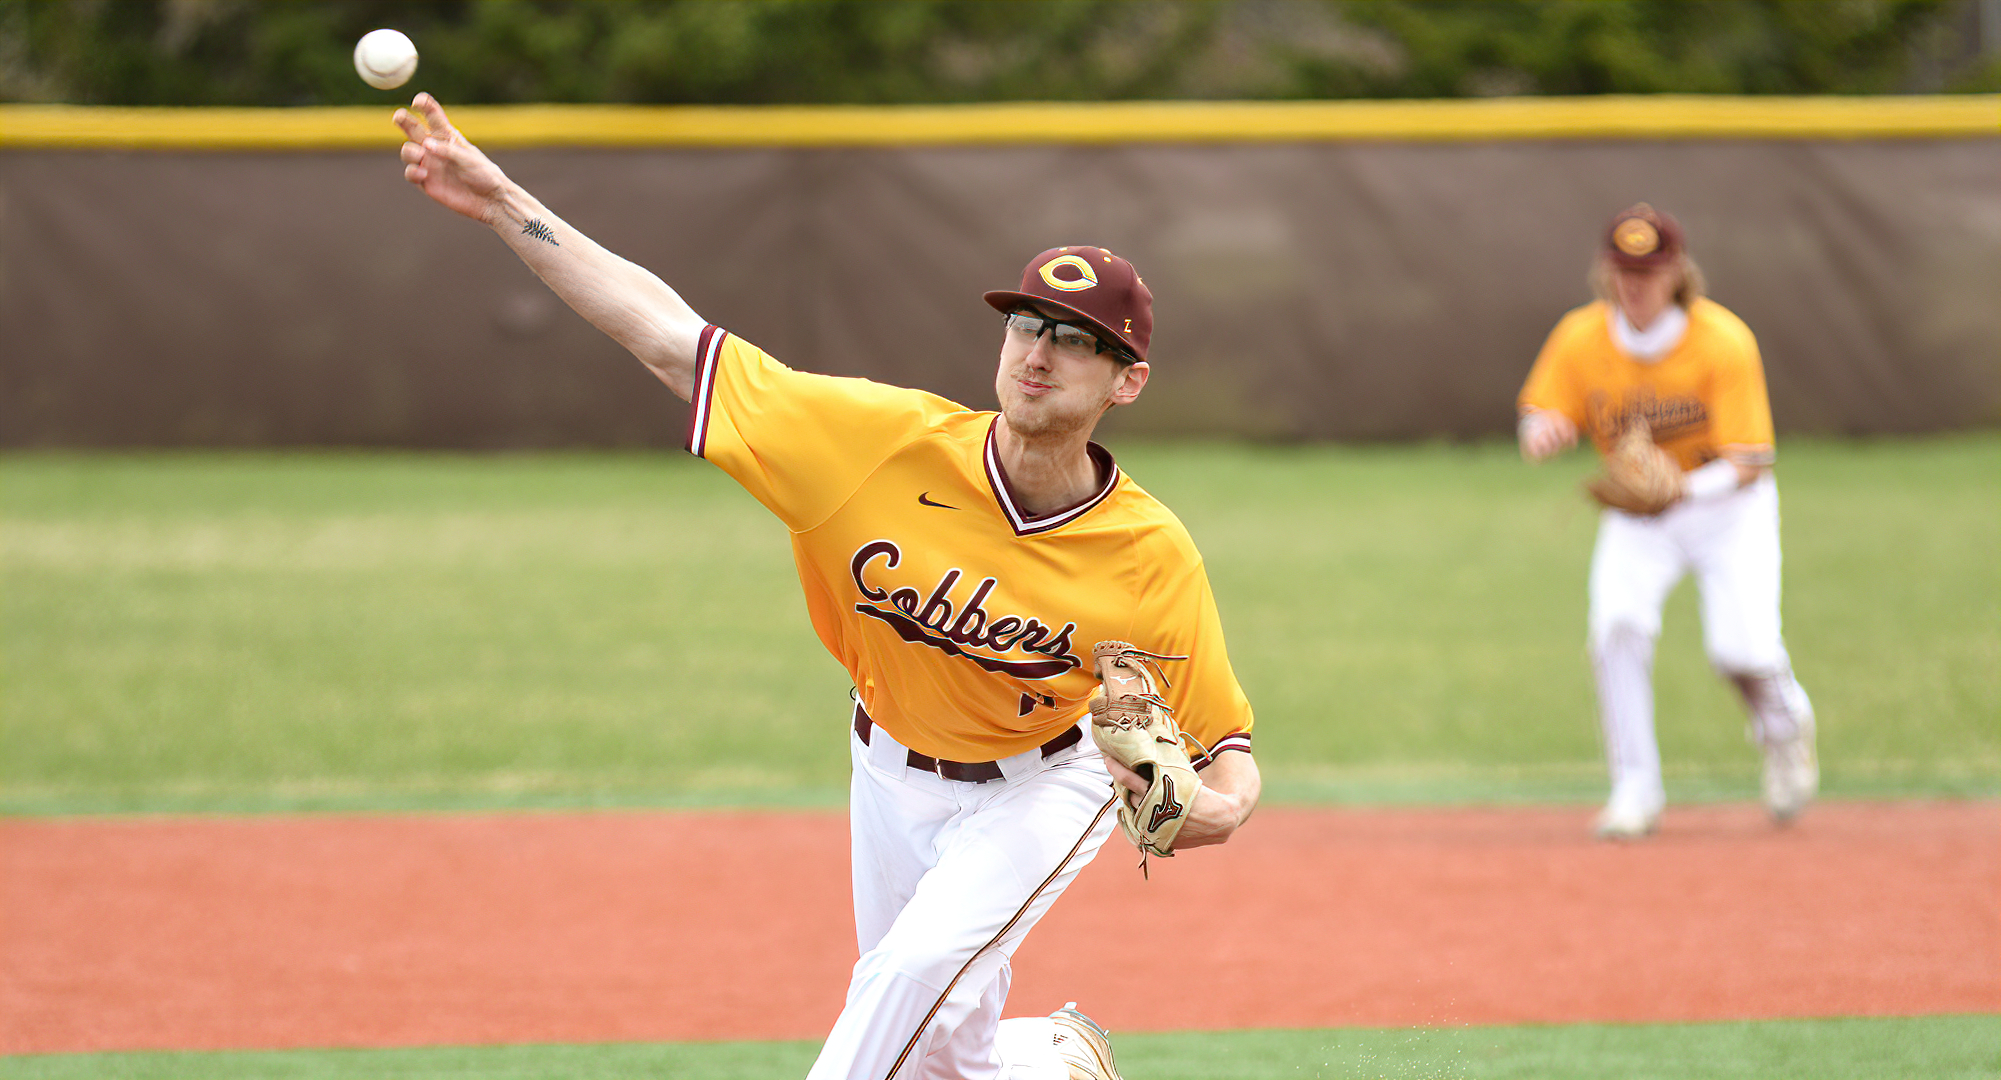 Junior Ashwin Stratton pitched 7.0 scoreless innings to help Concordia beat MSOE 5-2. He didn't allow a walk and struck out seven to earn the win.